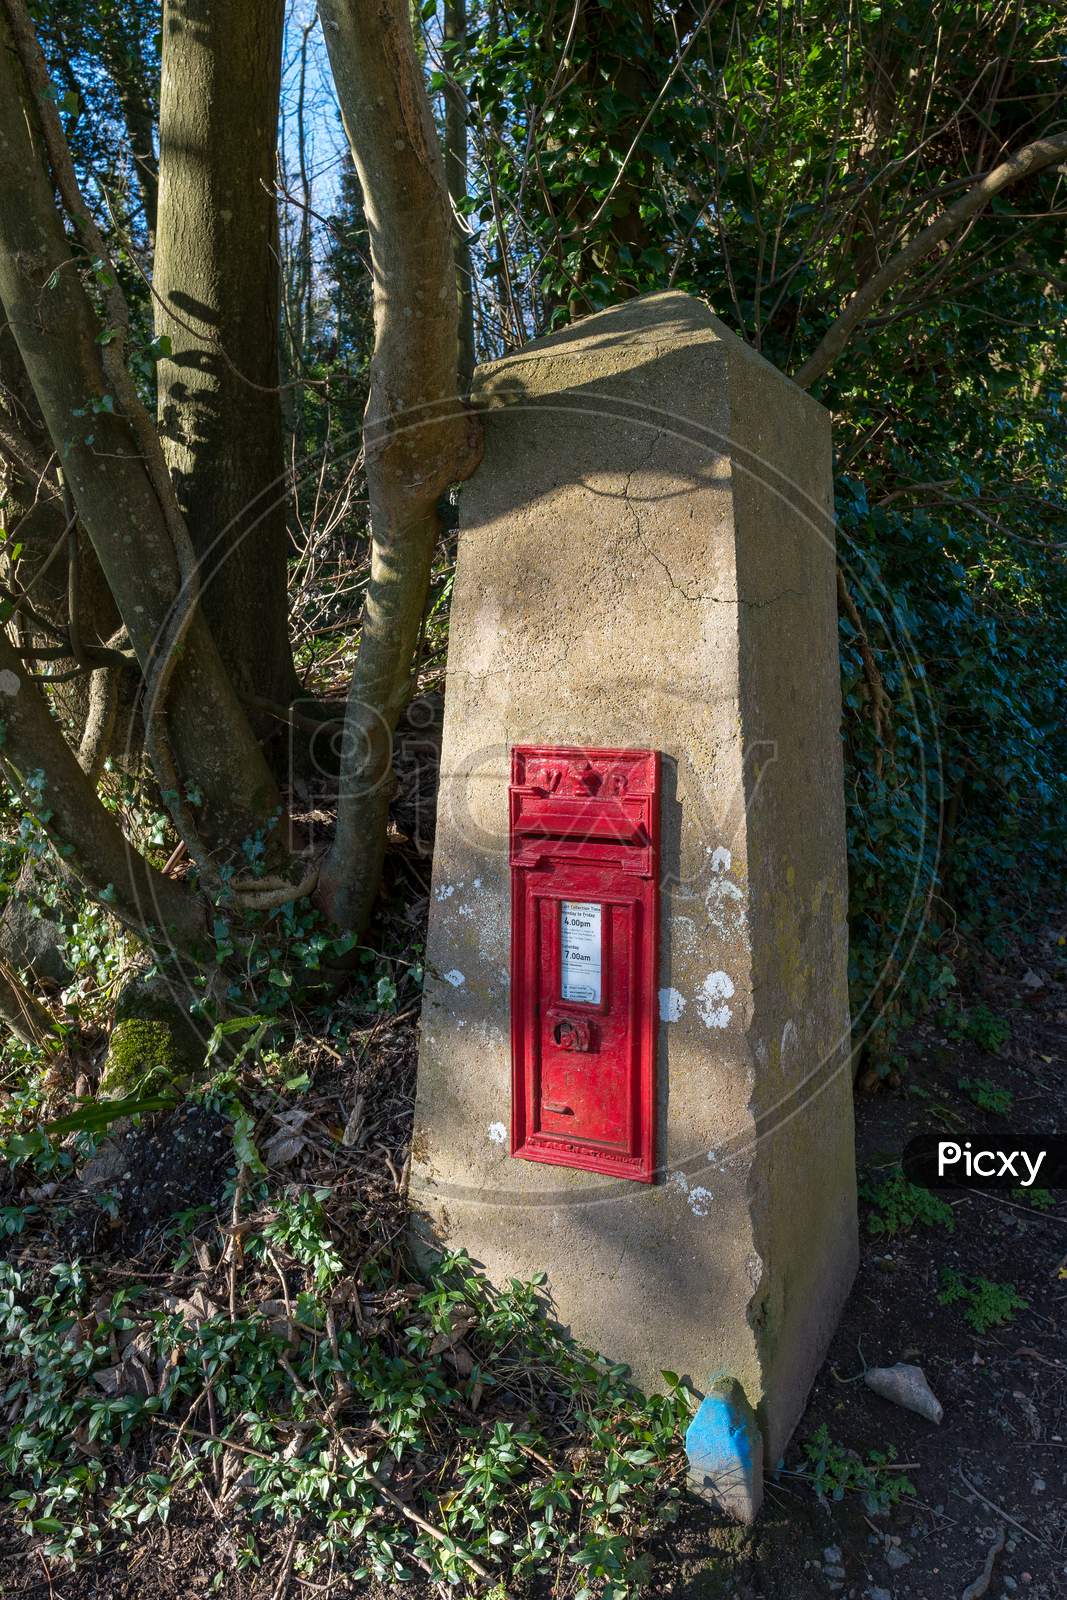 Folkington, East Sussex/Uk - January 28 : Old Red Post Box In Folkington, East Sussex On January 28, 2019